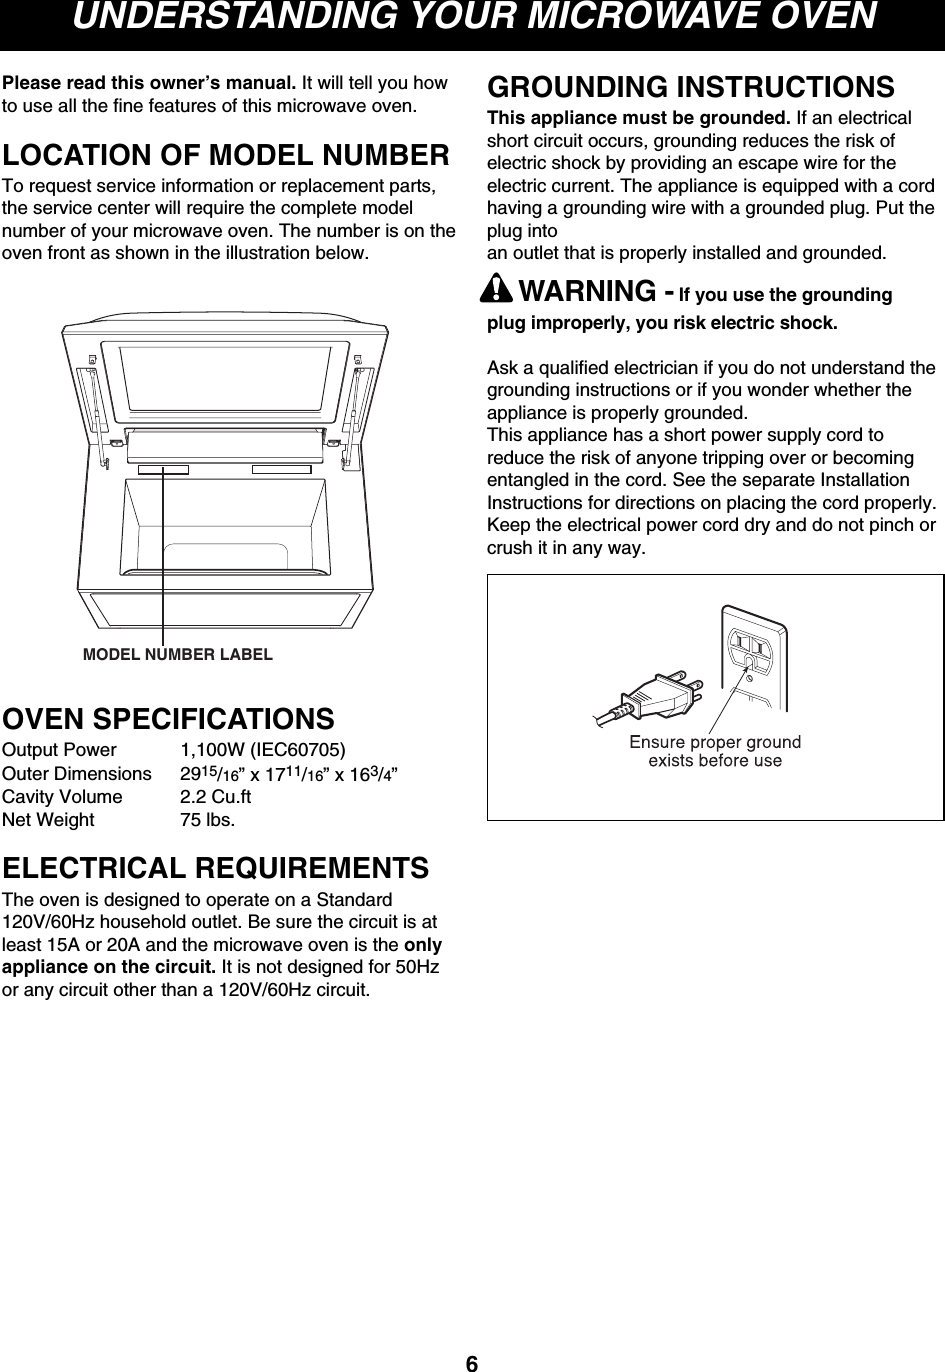 UNDERSTANDING YOUR MICROWAVE OVENPlease read this owner’s manual. It will tell you howto use all the fine features of this microwave oven.LOCATION OF MODEL NUMBERTo request service information or replacement parts,the service center will require the complete modelnumber of your microwave oven. The number is on theoven front as shown in the illustration below.OVEN SPECIFICATIONSOutput Power 1,100W (IEC60705)Outer Dimensions 2915/16” x 1711/16” x 163/4”Cavity Volume 2.2 Cu.ftNet Weight 75 lbs.ELECTRICAL REQUIREMENTSThe oven is designed to operate on a Standard120V/60Hz household outlet. Be sure the circuit is atleast 15A or 20A and the microwave oven is the onlyappliance on the circuit. It is not designed for 50Hzor any circuit other than a 120V/60Hz circuit.GROUNDING INSTRUCTIONSThis appliance must be grounded. If an electricalshort circuit occurs, grounding reduces the risk ofelectric shock by providing an escape wire for theelectric current. The appliance is equipped with a cordhaving a grounding wire with a grounded plug. Put theplug intoan outlet that is properly installed and grounded.WARNING - If you use the groundingplug improperly, you risk electric shock.Ask a qualified electrician if you do not understand thegrounding instructions or if you wonder whether theappliance is properly grounded.This appliance has a short power supply cord toreduce the risk of anyone tripping over or becomingentangled in the cord. See the separate InstallationInstructions for directions on placing the cord properly.Keep the electrical power cord dry and do not pinch orcrush it in any way.6MODEL NUMBER LABEL